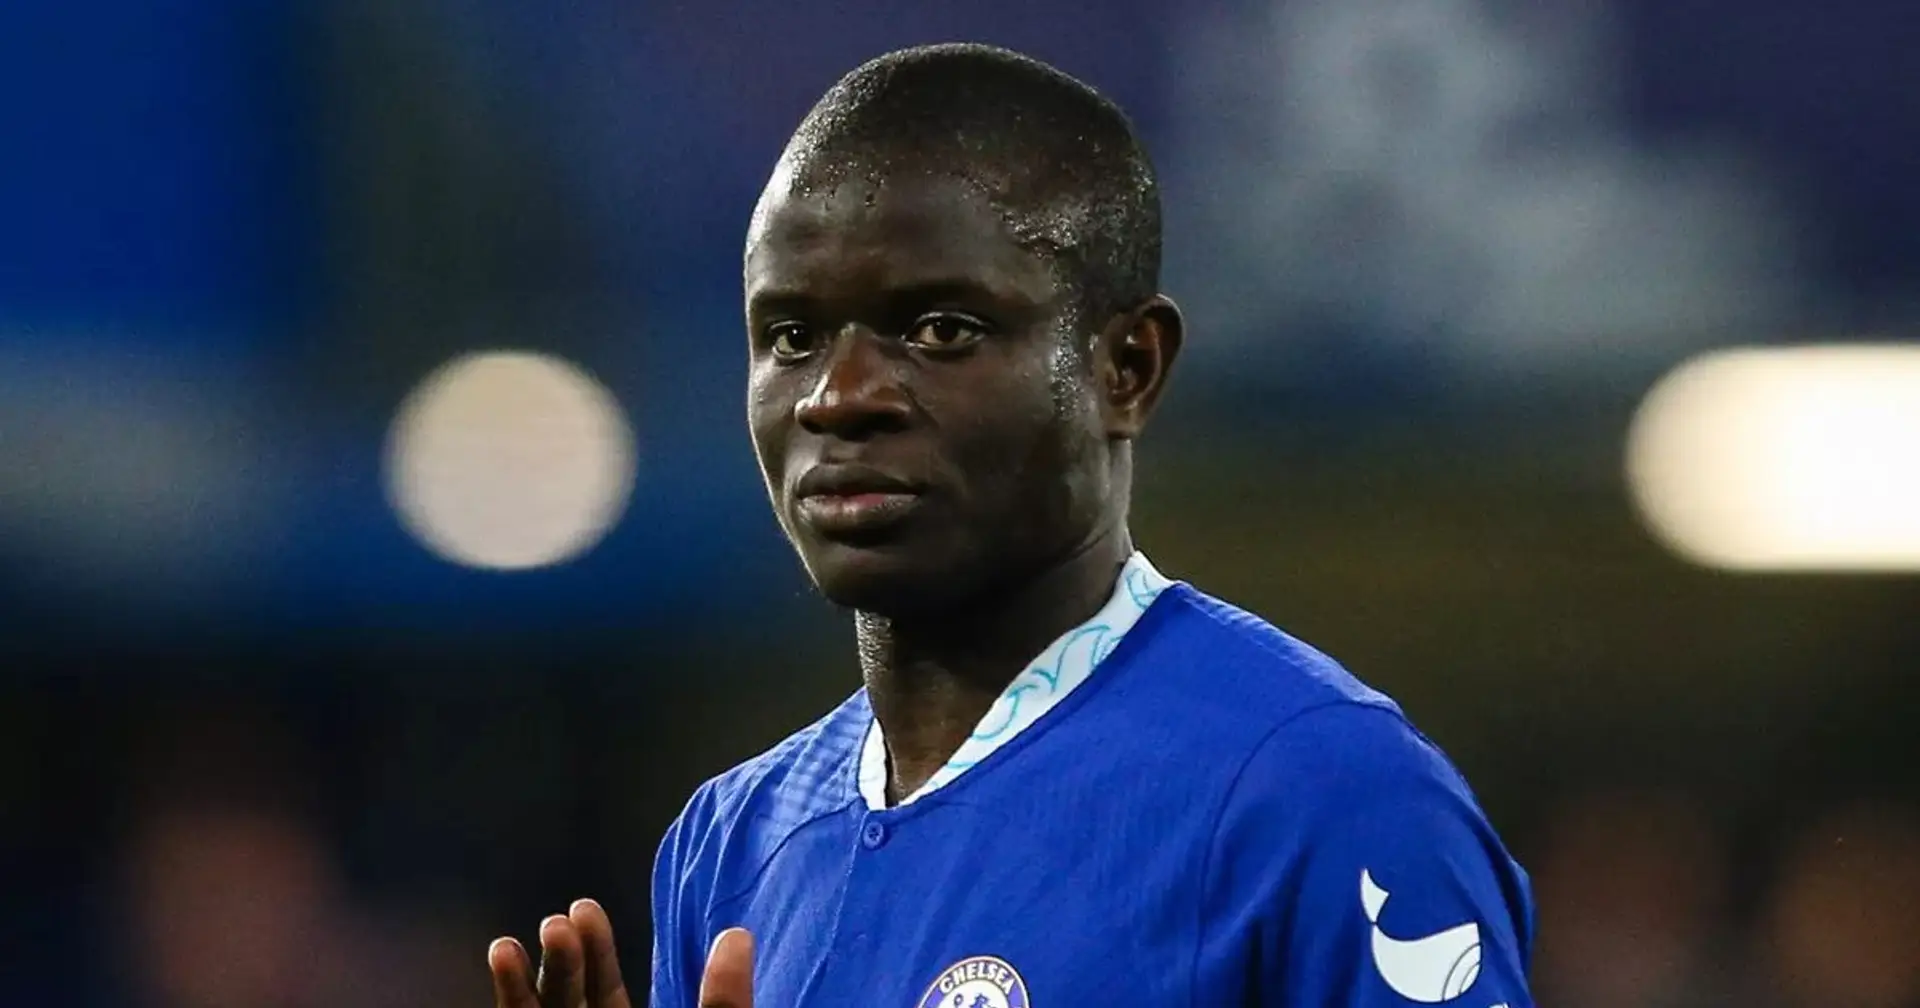 Kante's Saudi Arabia move under threat & 2 more big stories you might've missed